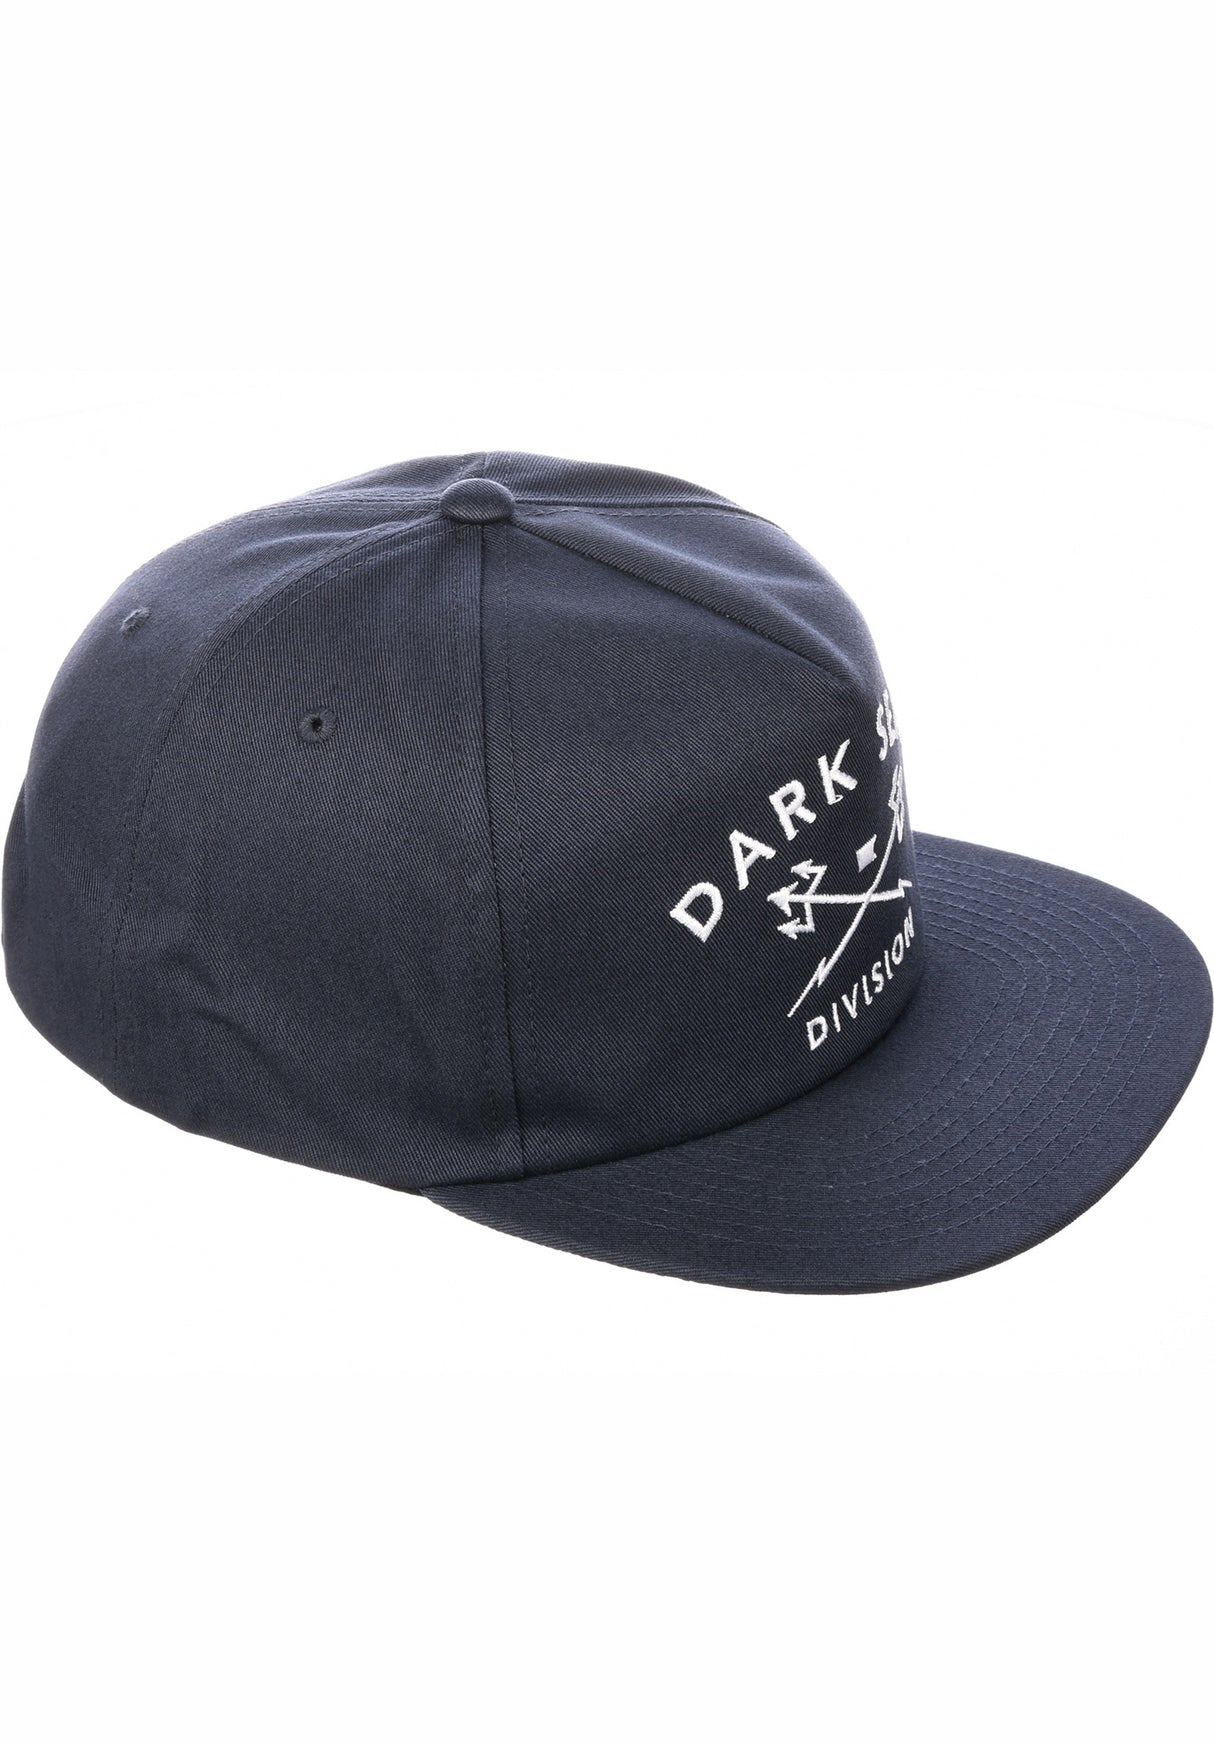 Tridents Snapback Unstructured navy Close-Up2